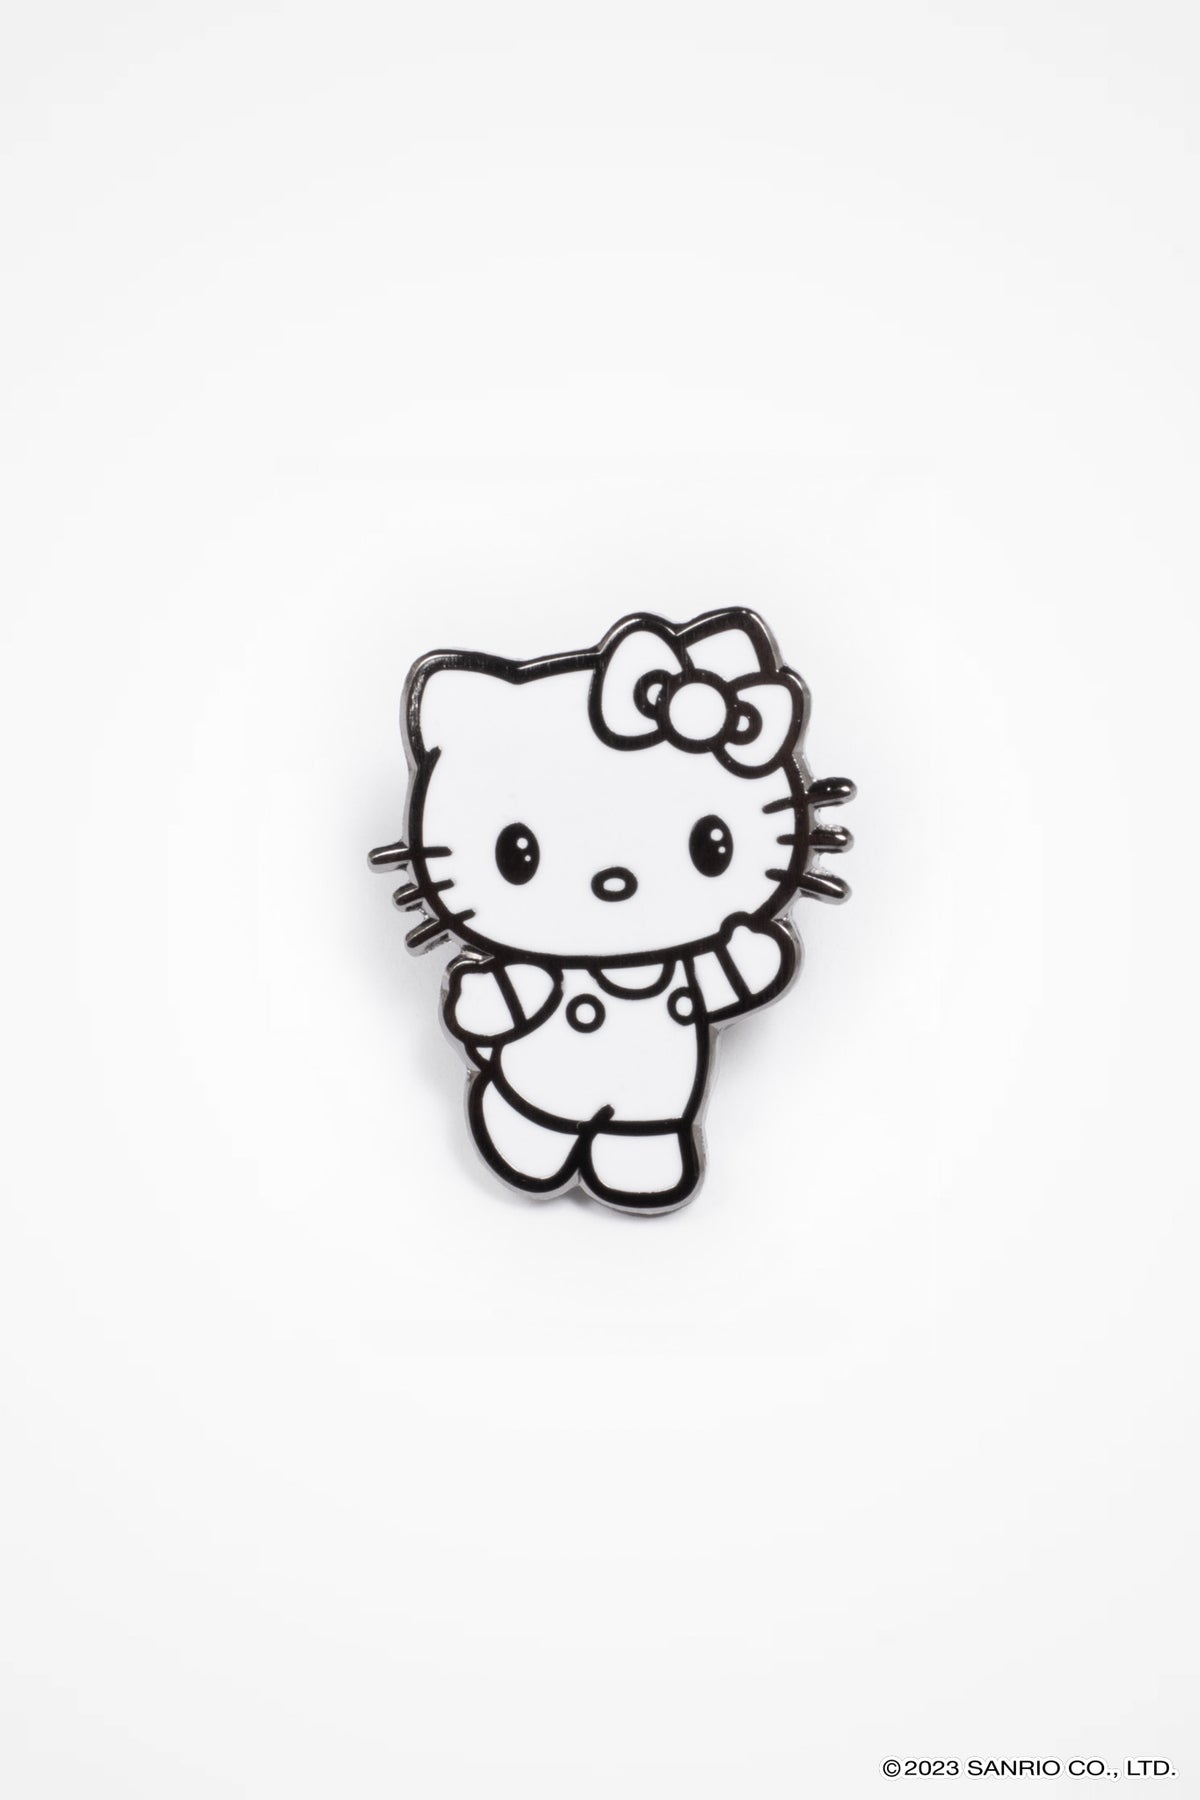 hello kitty images black and white